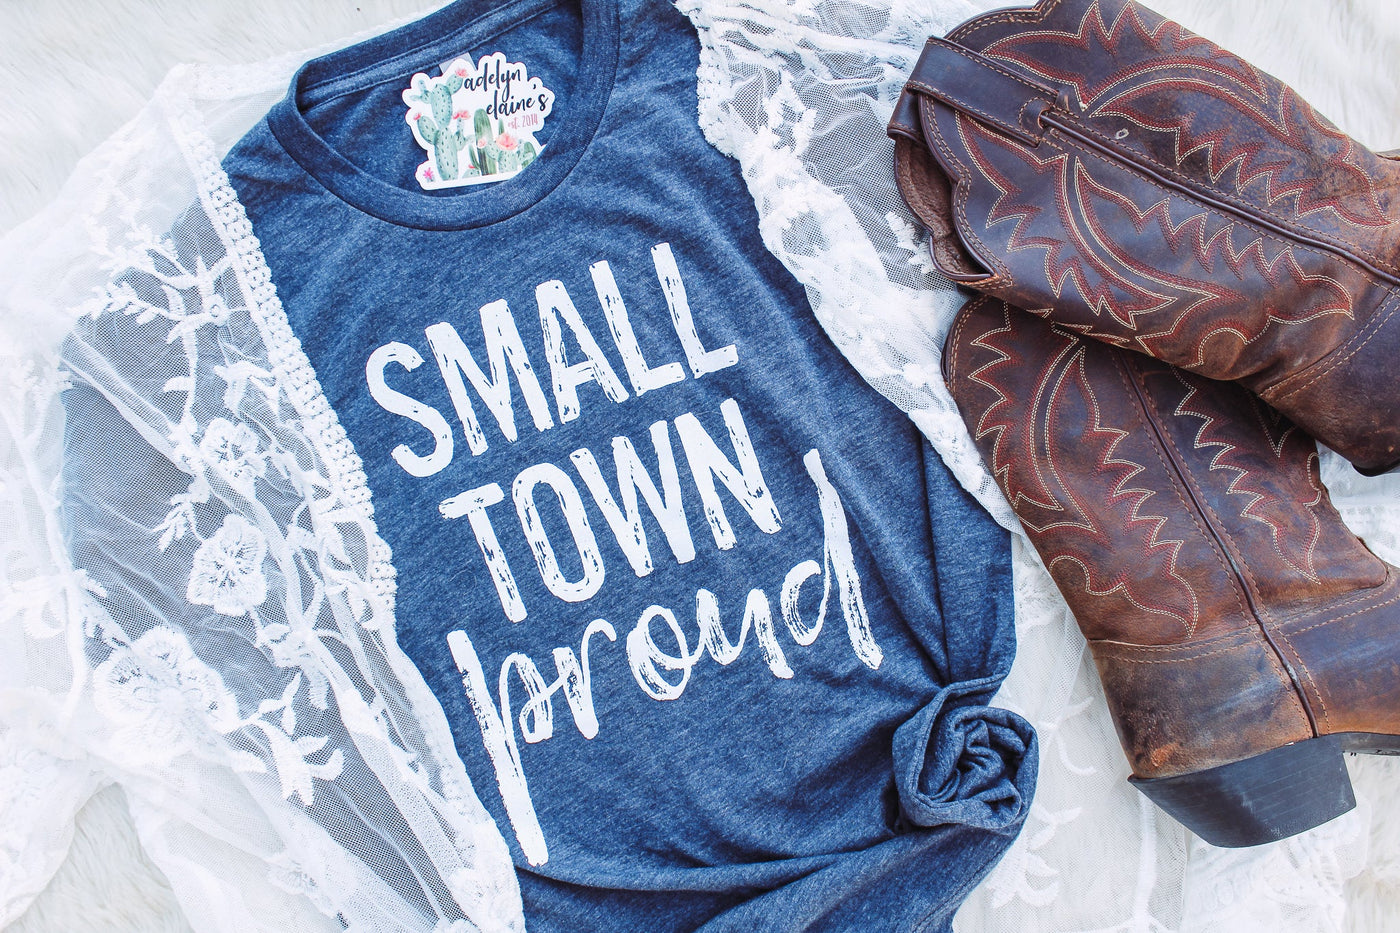 Small Town Proud - Crew Neck T-Shirt